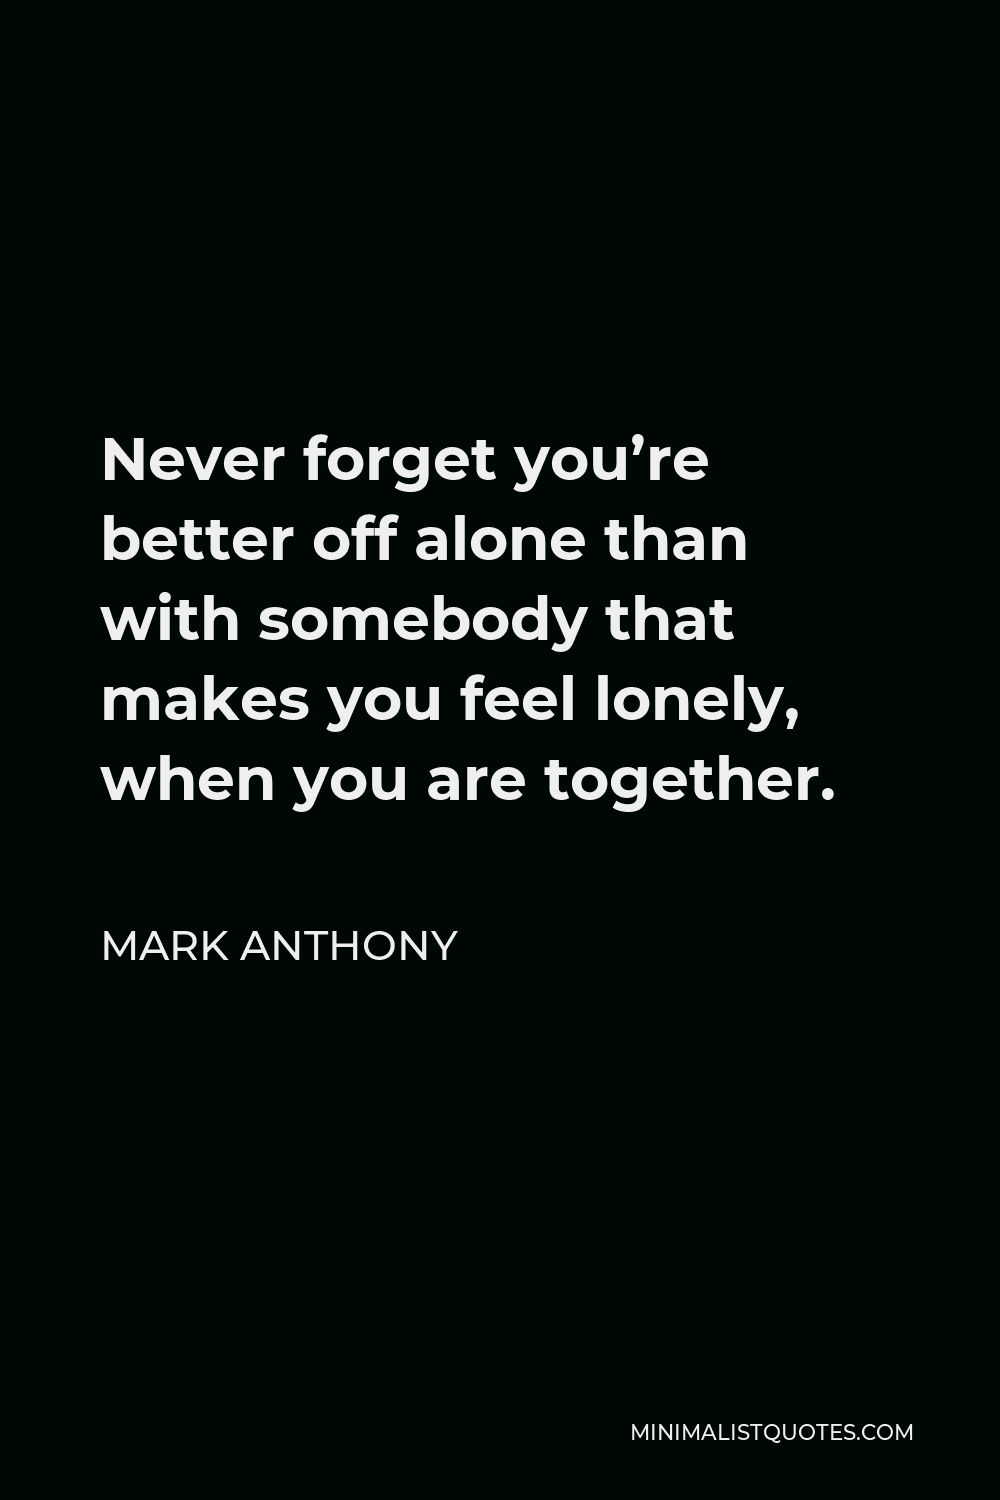 Mark Anthony Quote - Never forget you’re better off alone than with somebody that makes you feel lonely, when you are together.